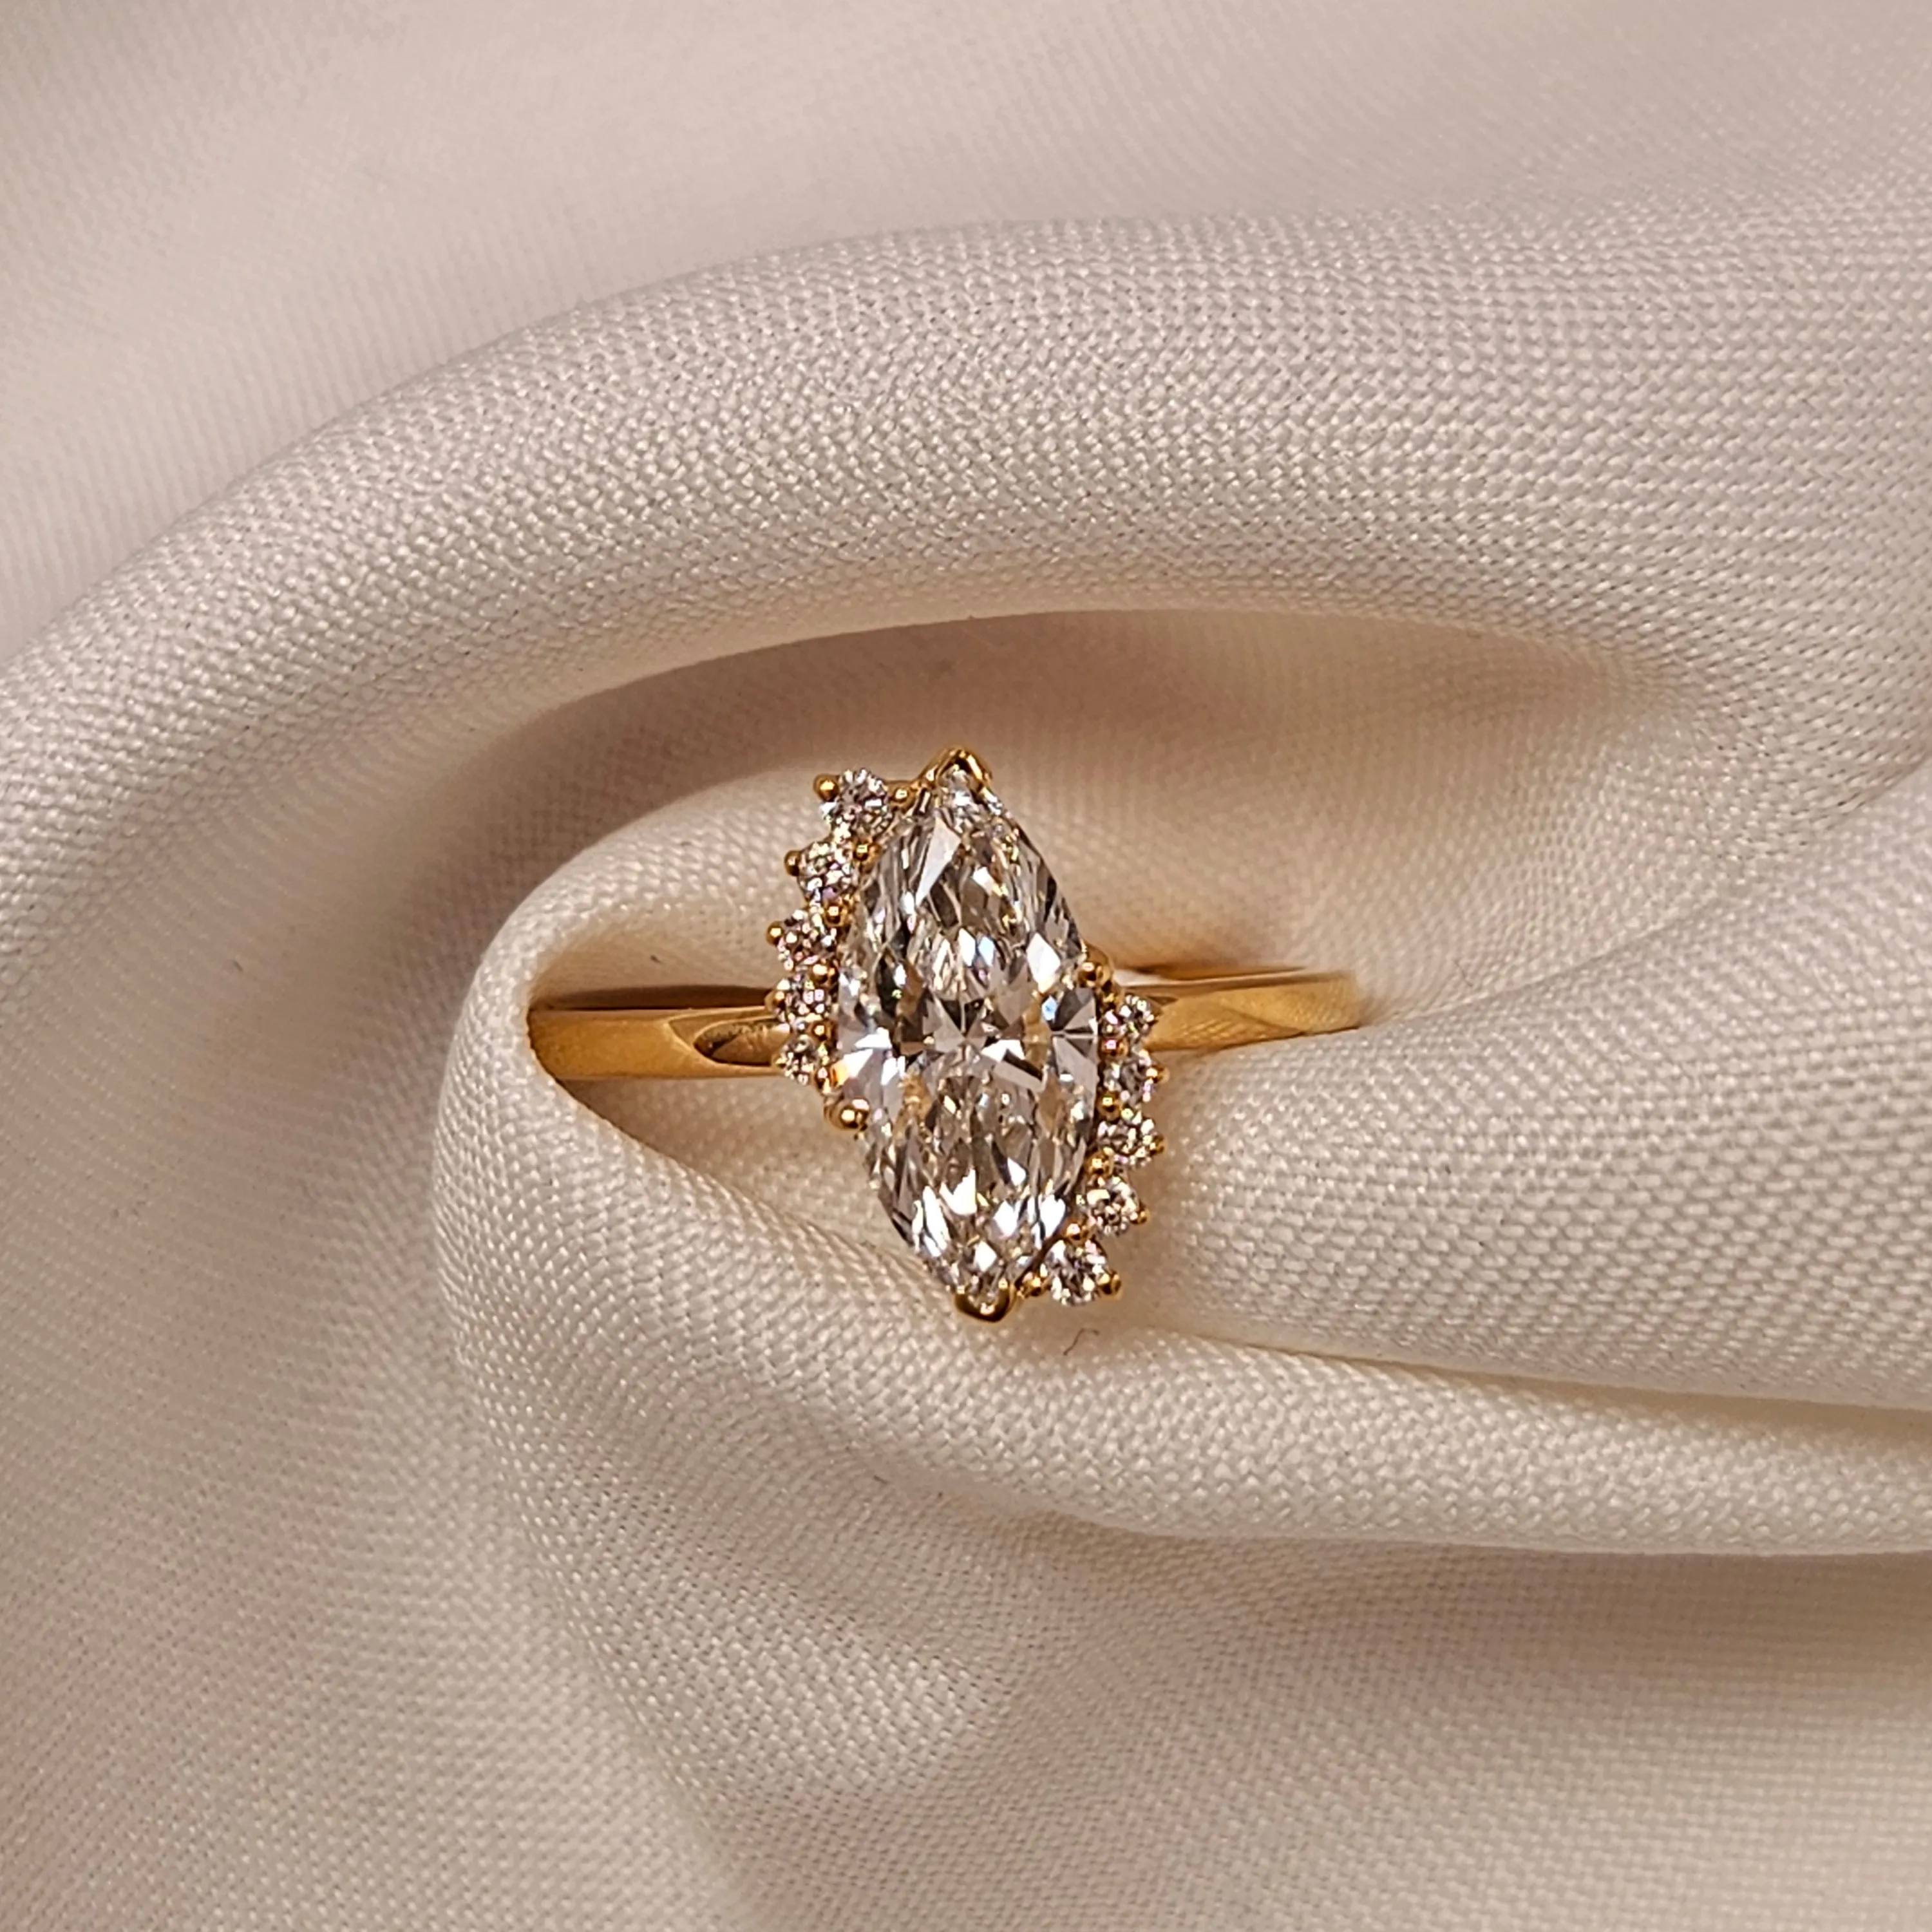 Ring Engagement Ring Gold Over Silver Solid for Women diamond moissanite 18K White Round Brilliant Cut 1 Ct Jewelry Gift Custom